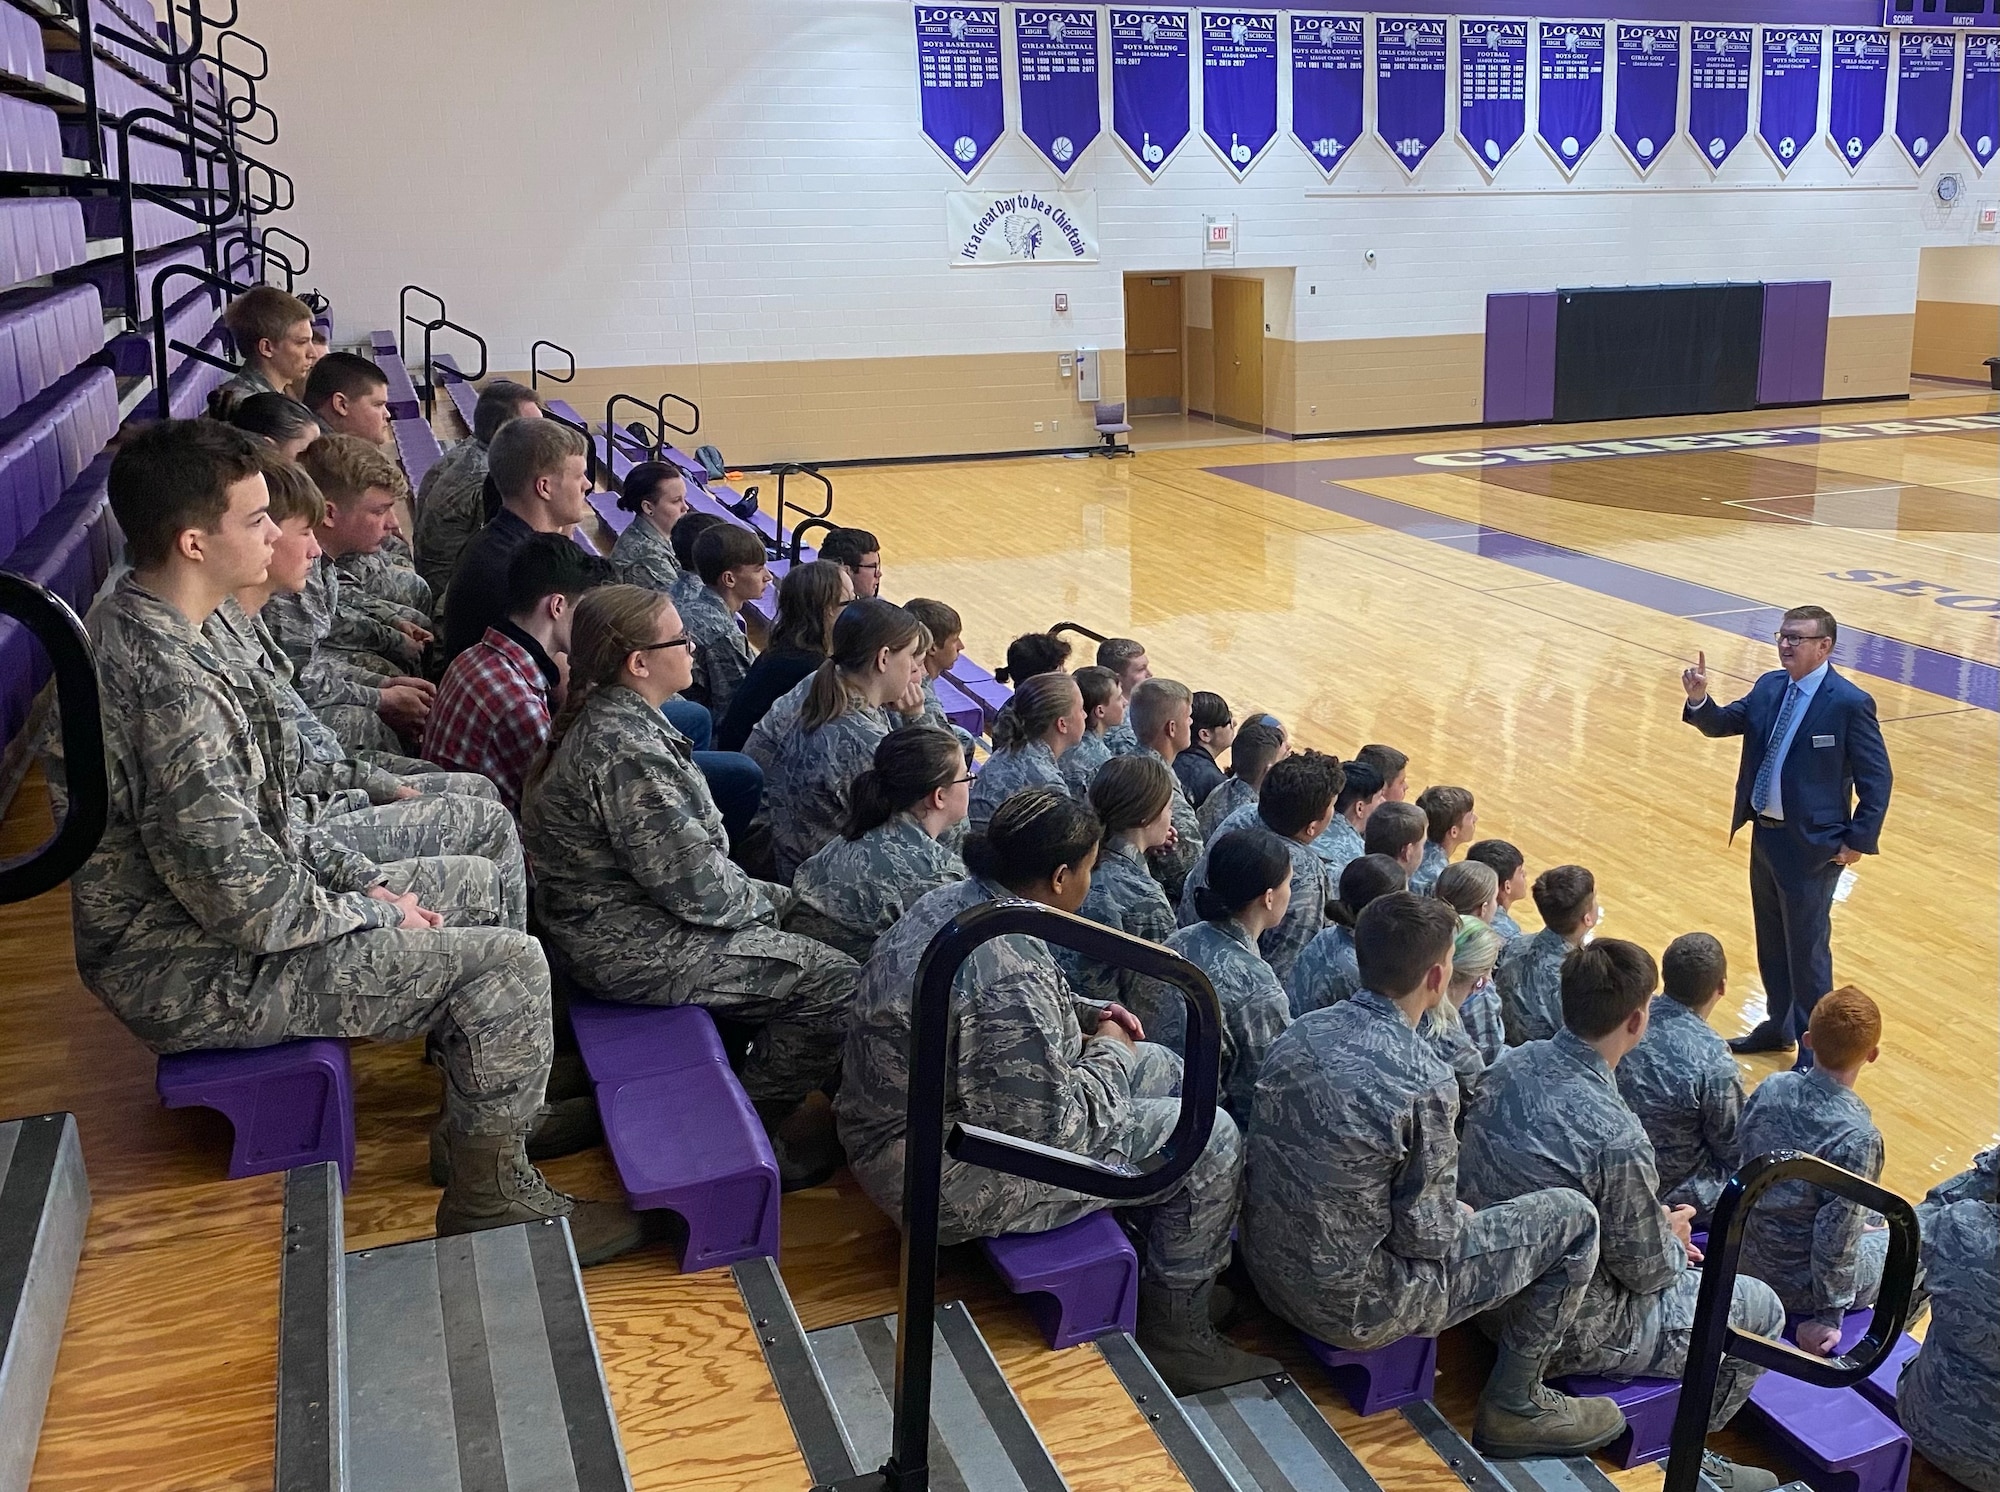 Air Force Junior ROTC Leadership Development Manager Wayne Barron speaks to a group of cadets at Logan High School, Logan, Ohio, Aug. 29, 2022.  Logan High School received approval to start an Air Force Junior ROTC program last year, and the program started its first full academic year in August of 2022.